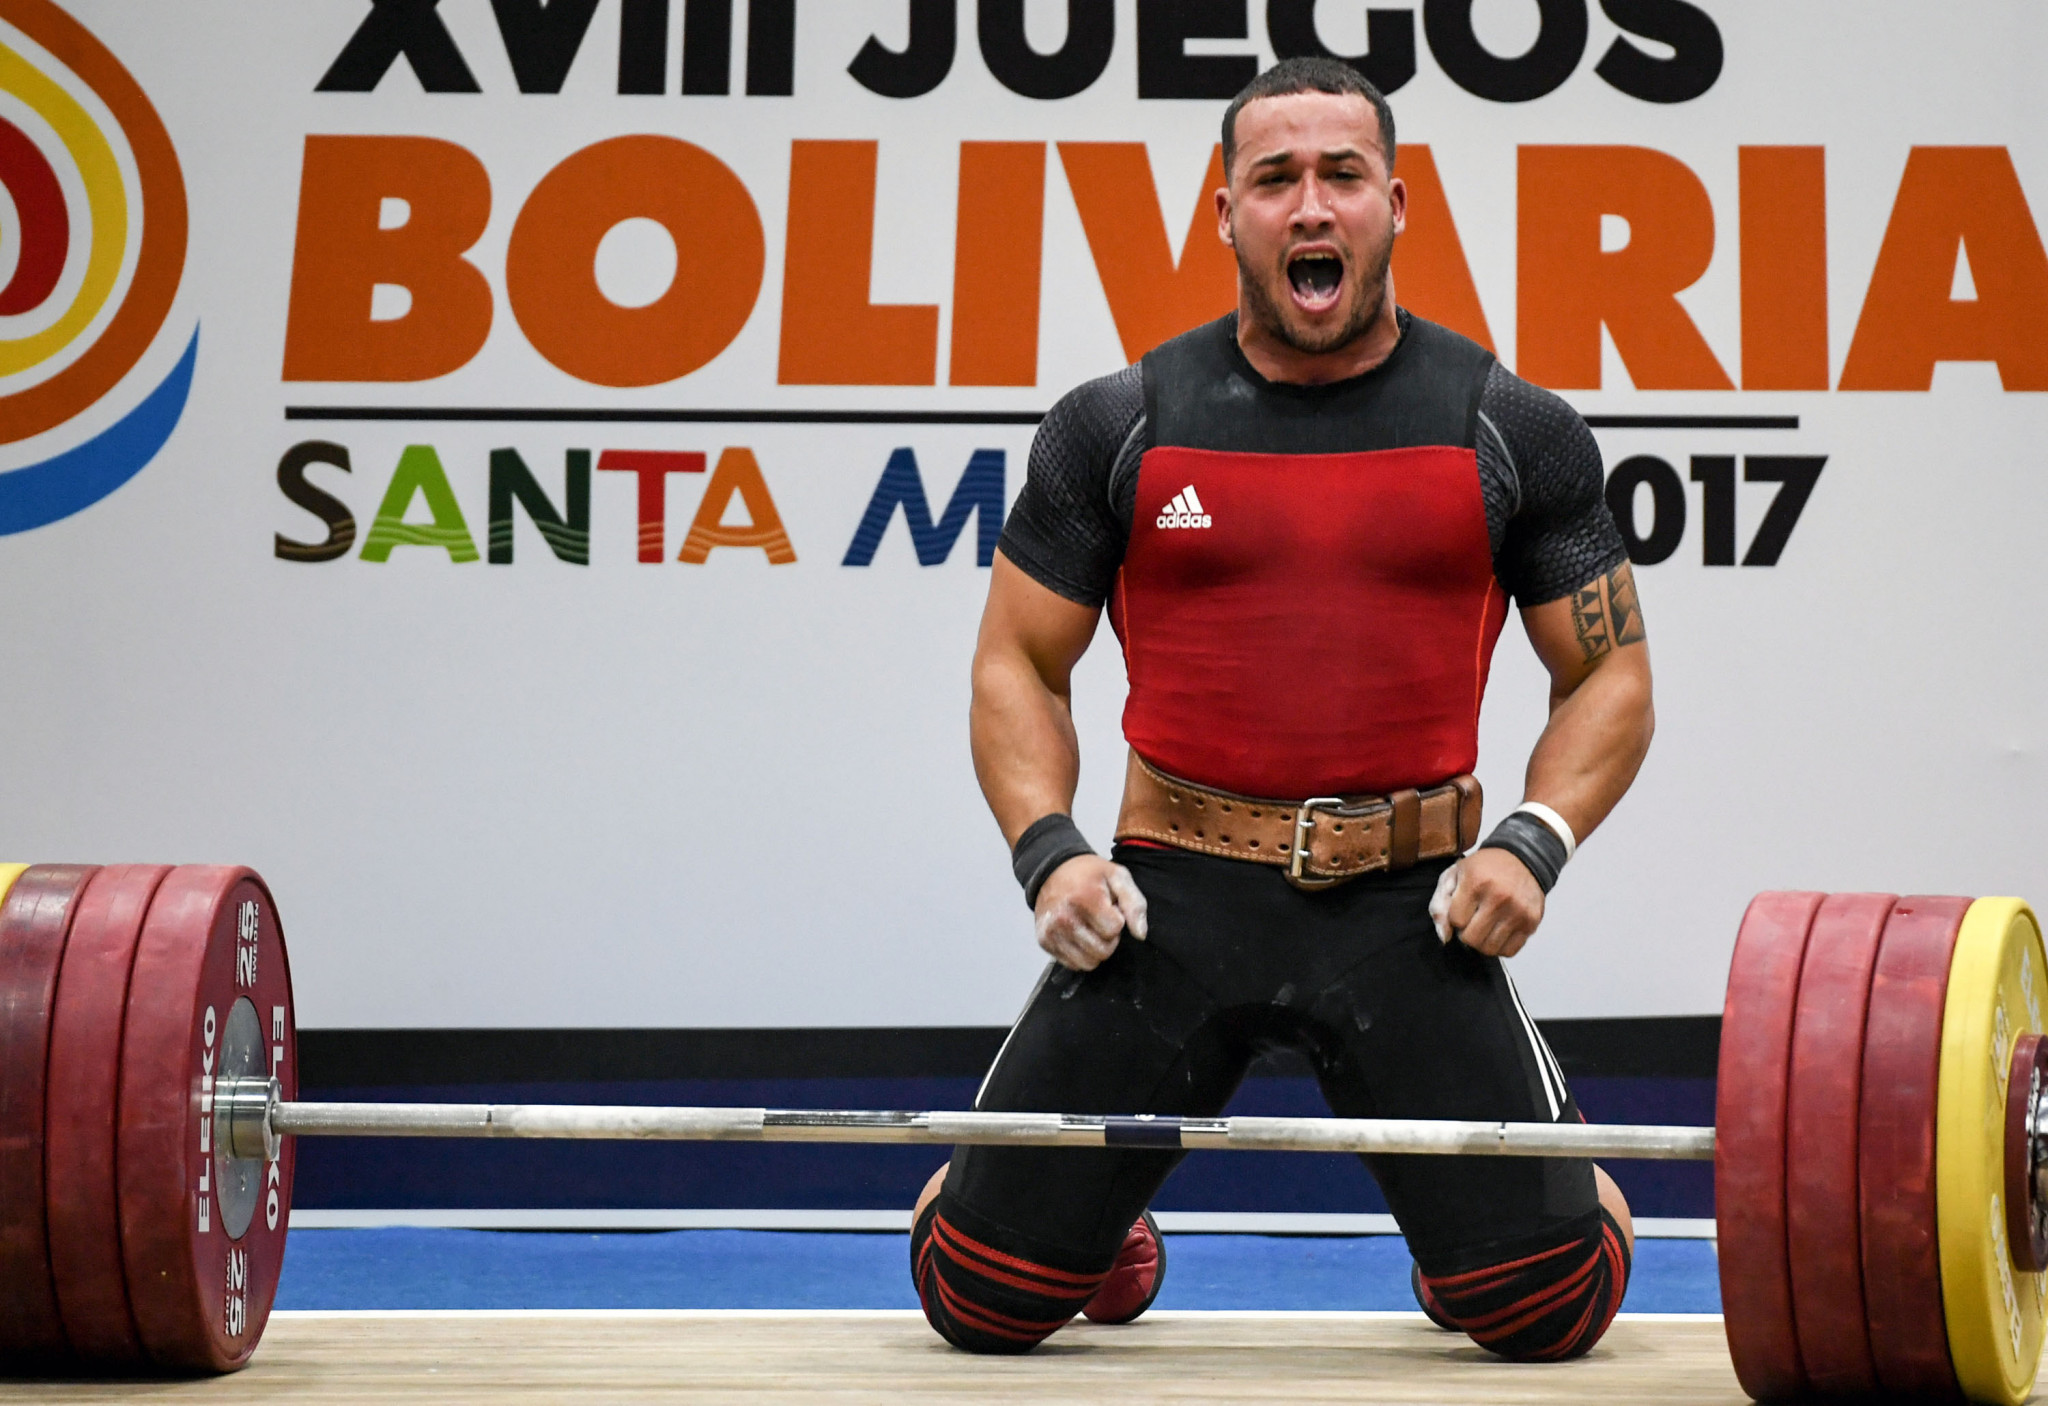 Chile's Arley Mendez celebrates after obtaining the gold medal in the men's 85kg weightlifting event, during the XVIII Bolivarian Games 2017, in Santa Marta, Colombia last month ©Getty Images